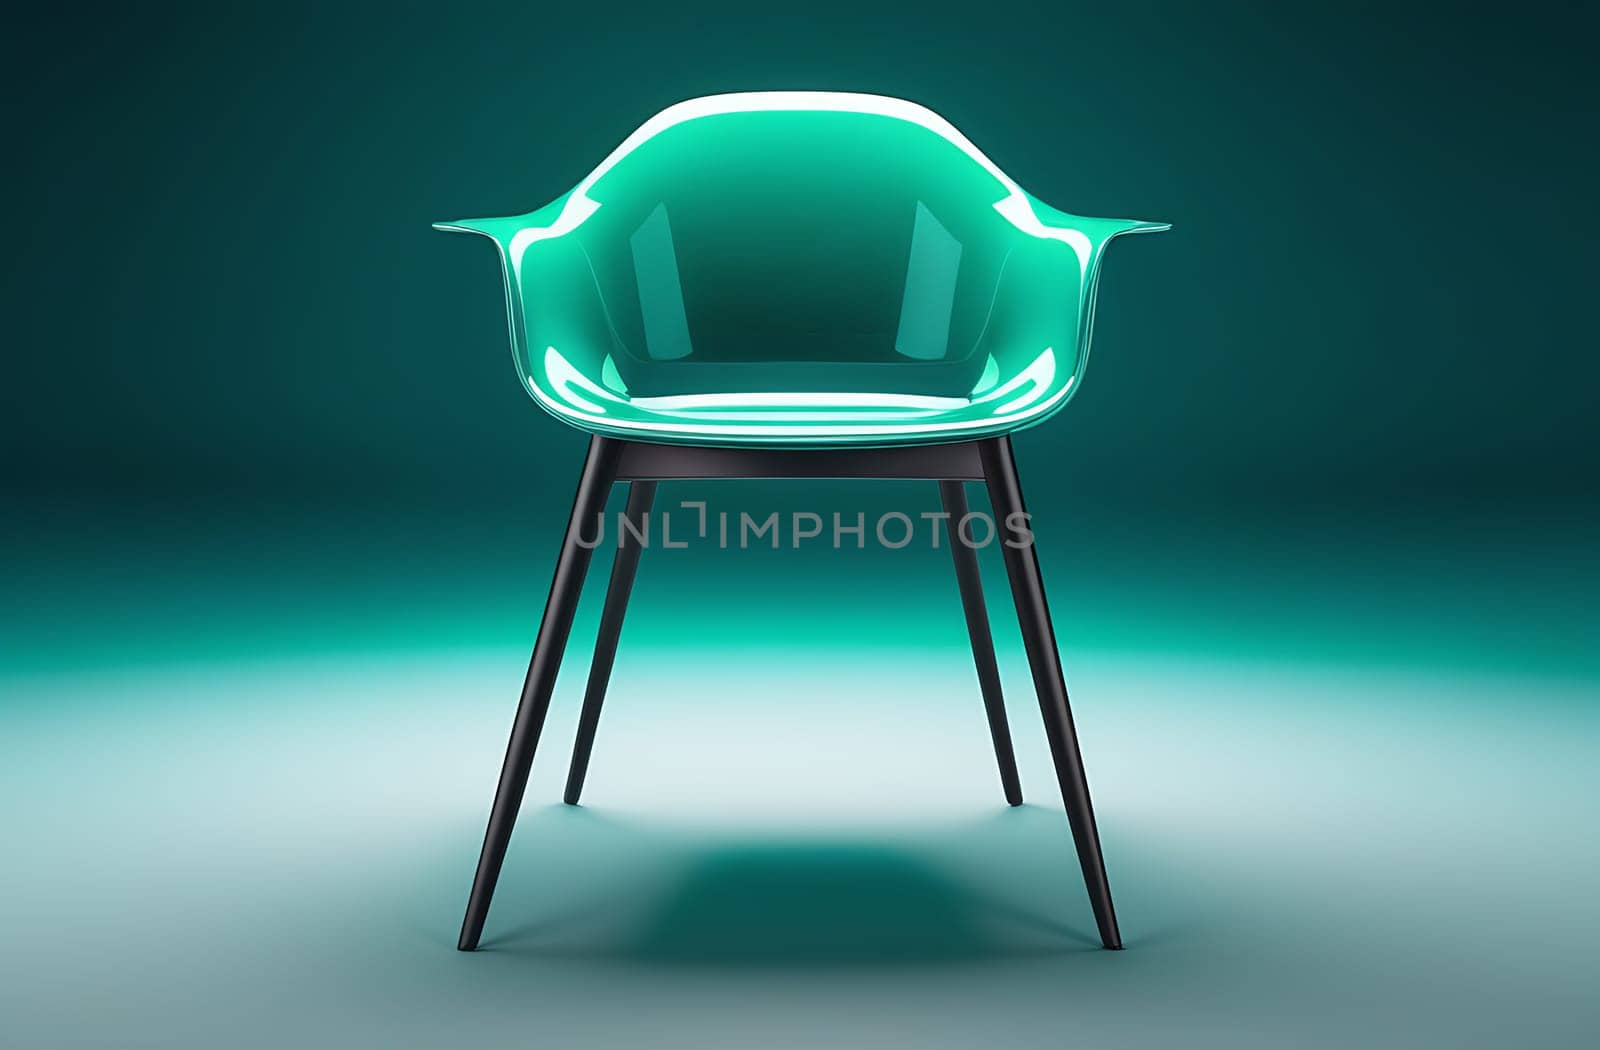 One transparent acrylic chair in green color, on a dark background, modern design by claire_lucia